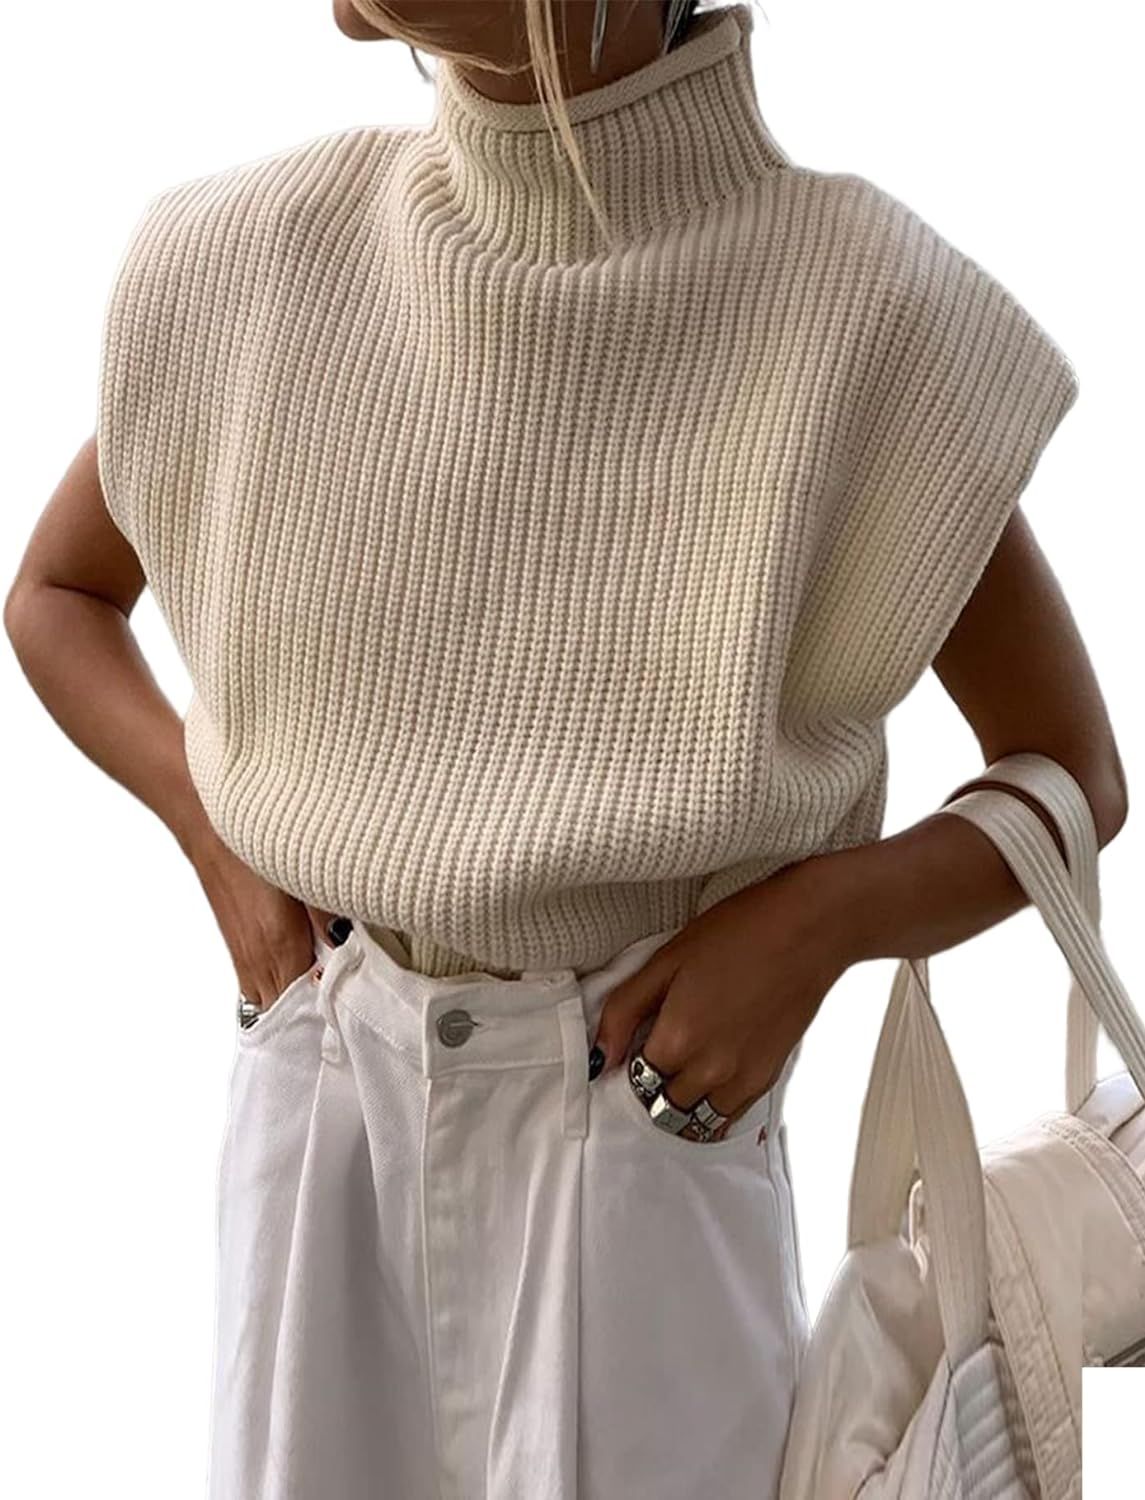 Women's Knit Sweater Vest Sleeveless Shoulder Pad Turtleneck Pullover Solid Knitted Top | Amazon (US)